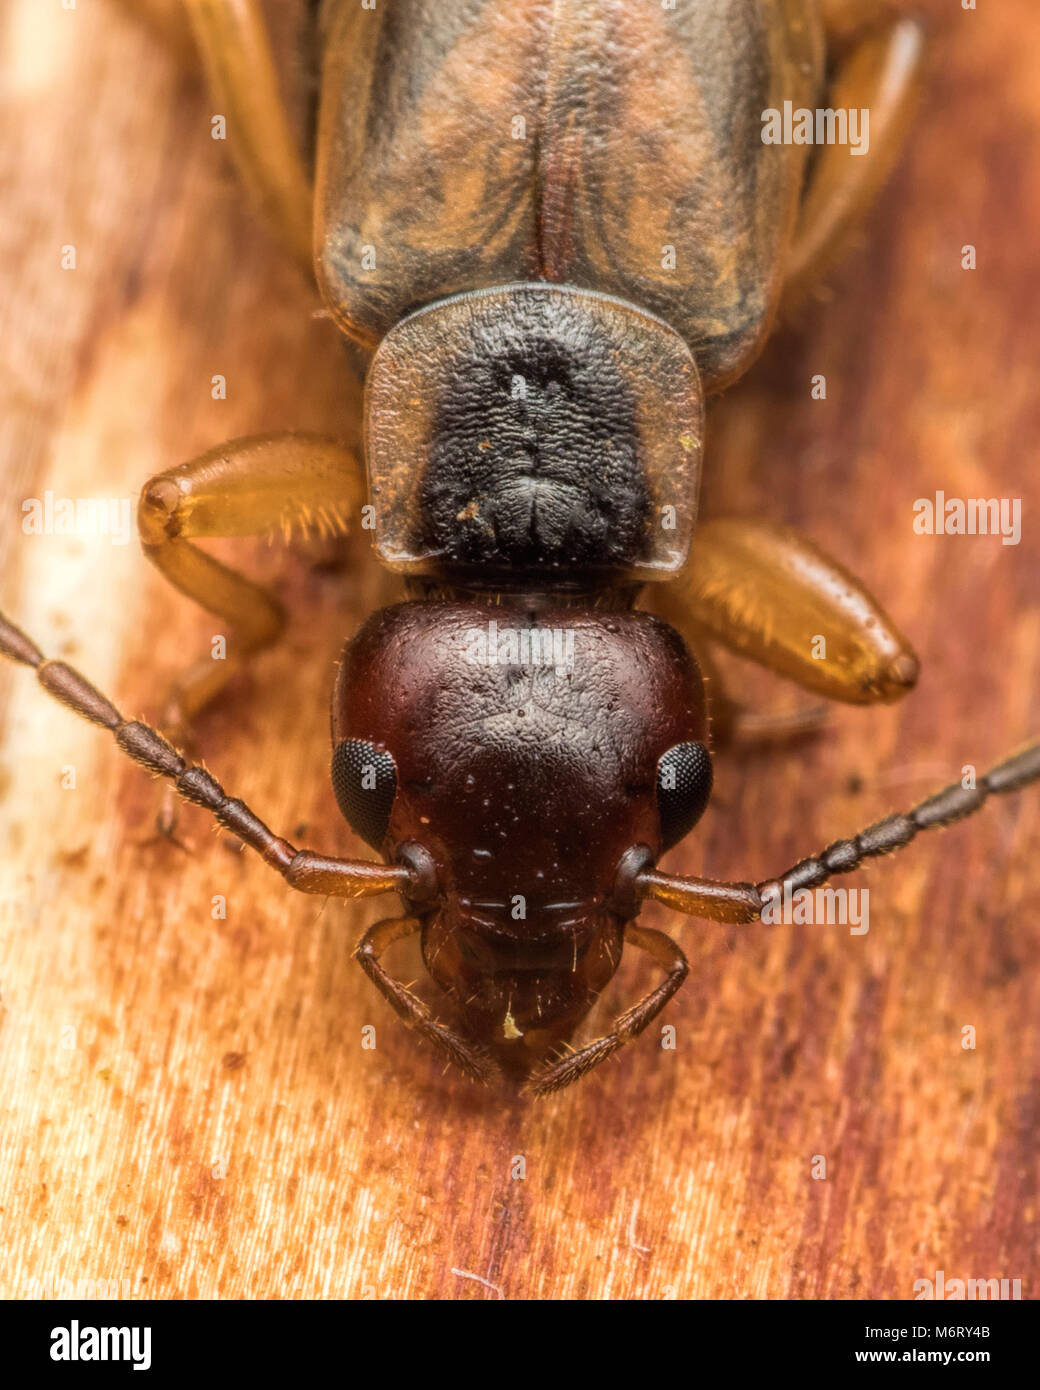 Common Earwig (Forficula auricularia) close up of the head showing the eyes and antennae. Tipperary, Ireland Stock Photo